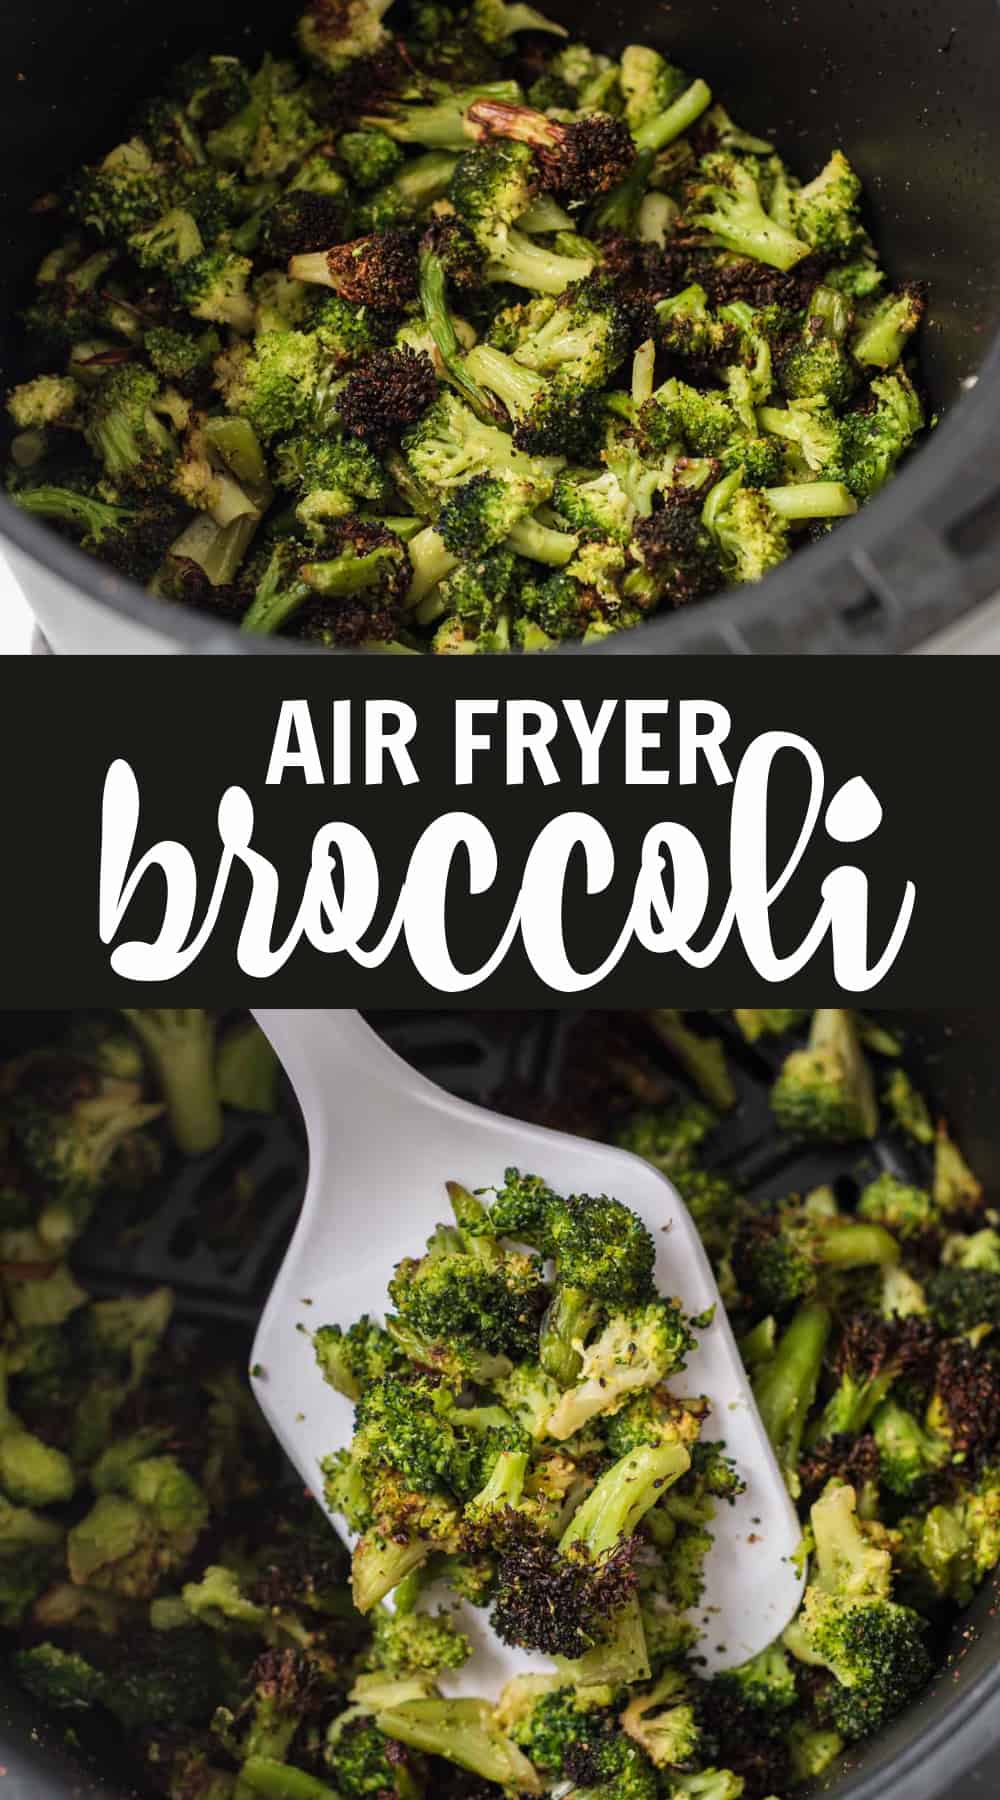 image with text "air fryer broccoli"